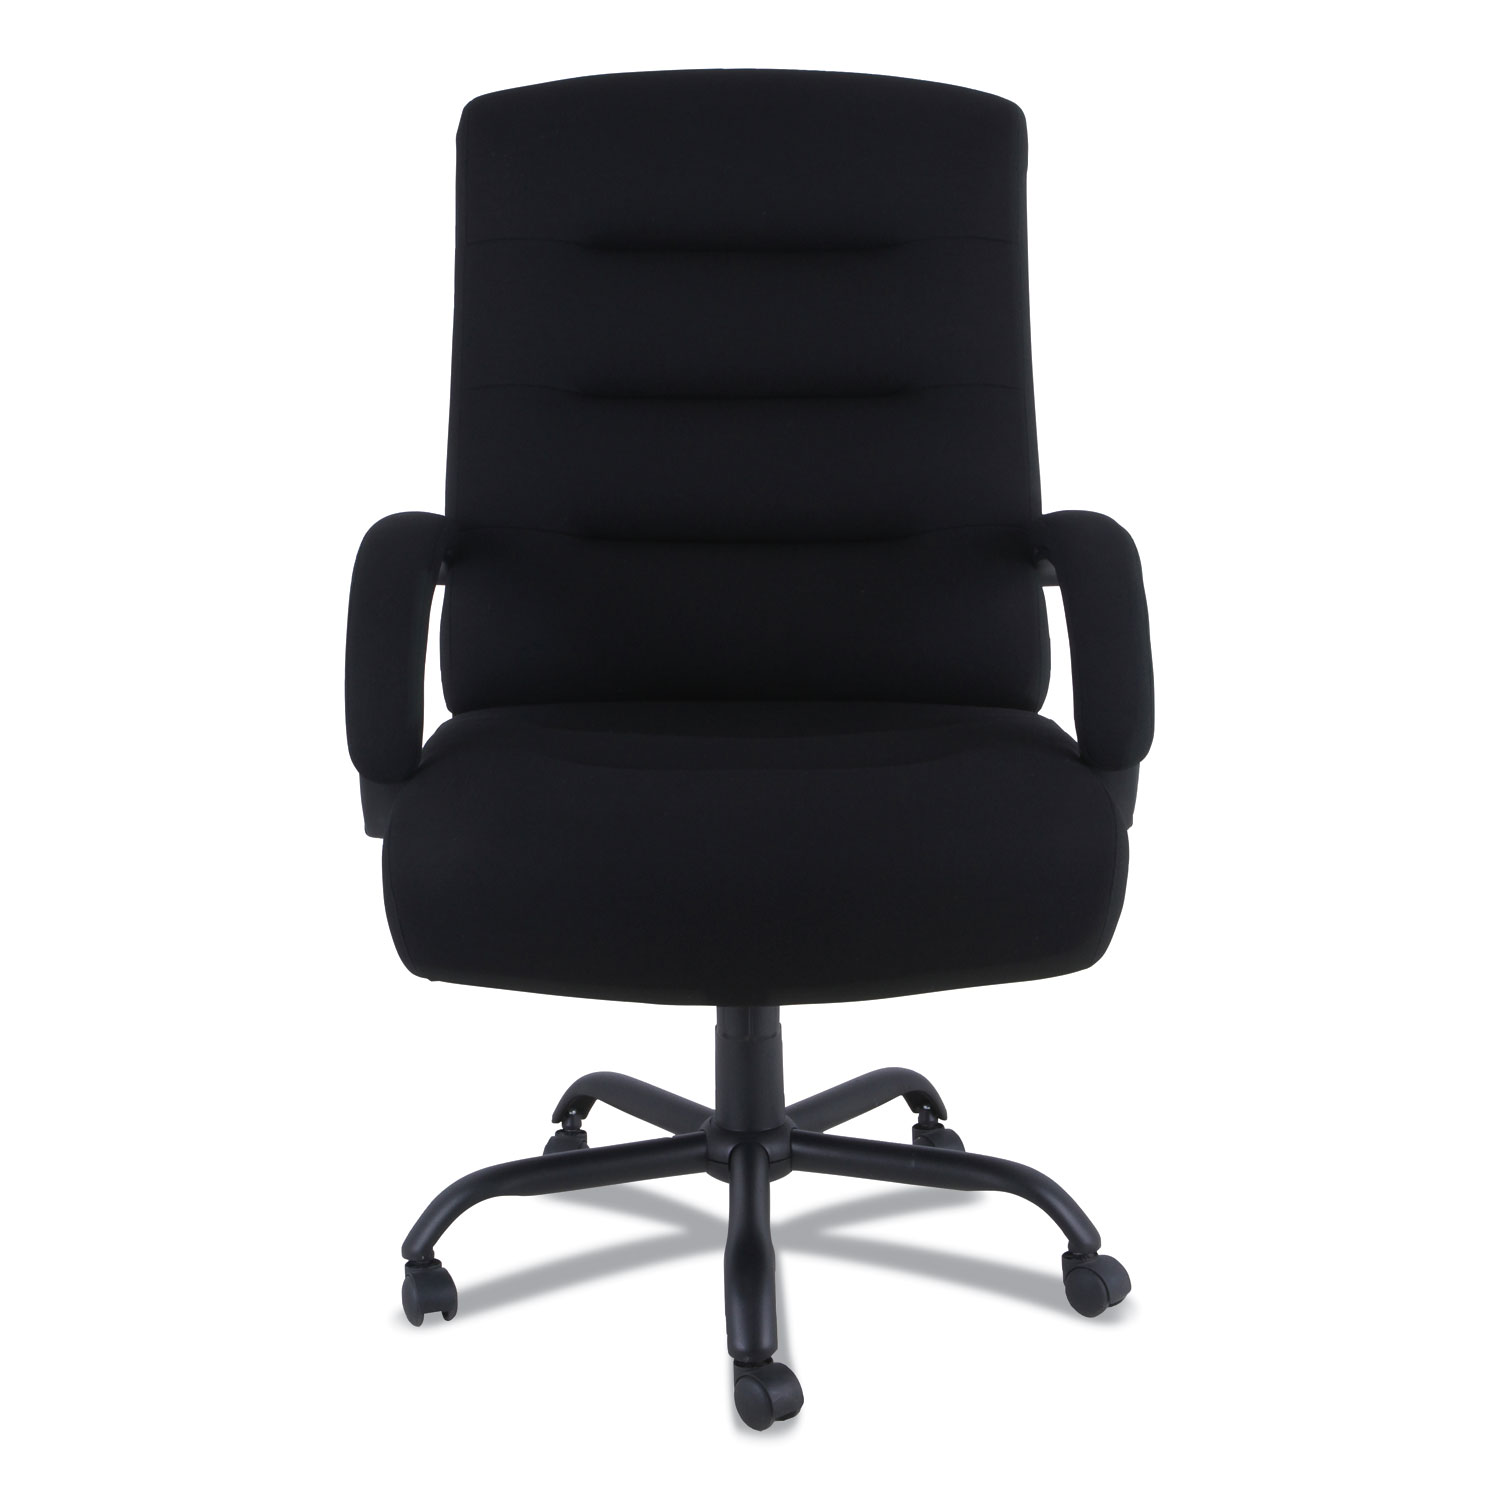 Alera Kesson Series Big and Tall Office Chair, 25.4 Seat Height, Supports up to 450 lbs., Black Seat/Black Back, Black Base